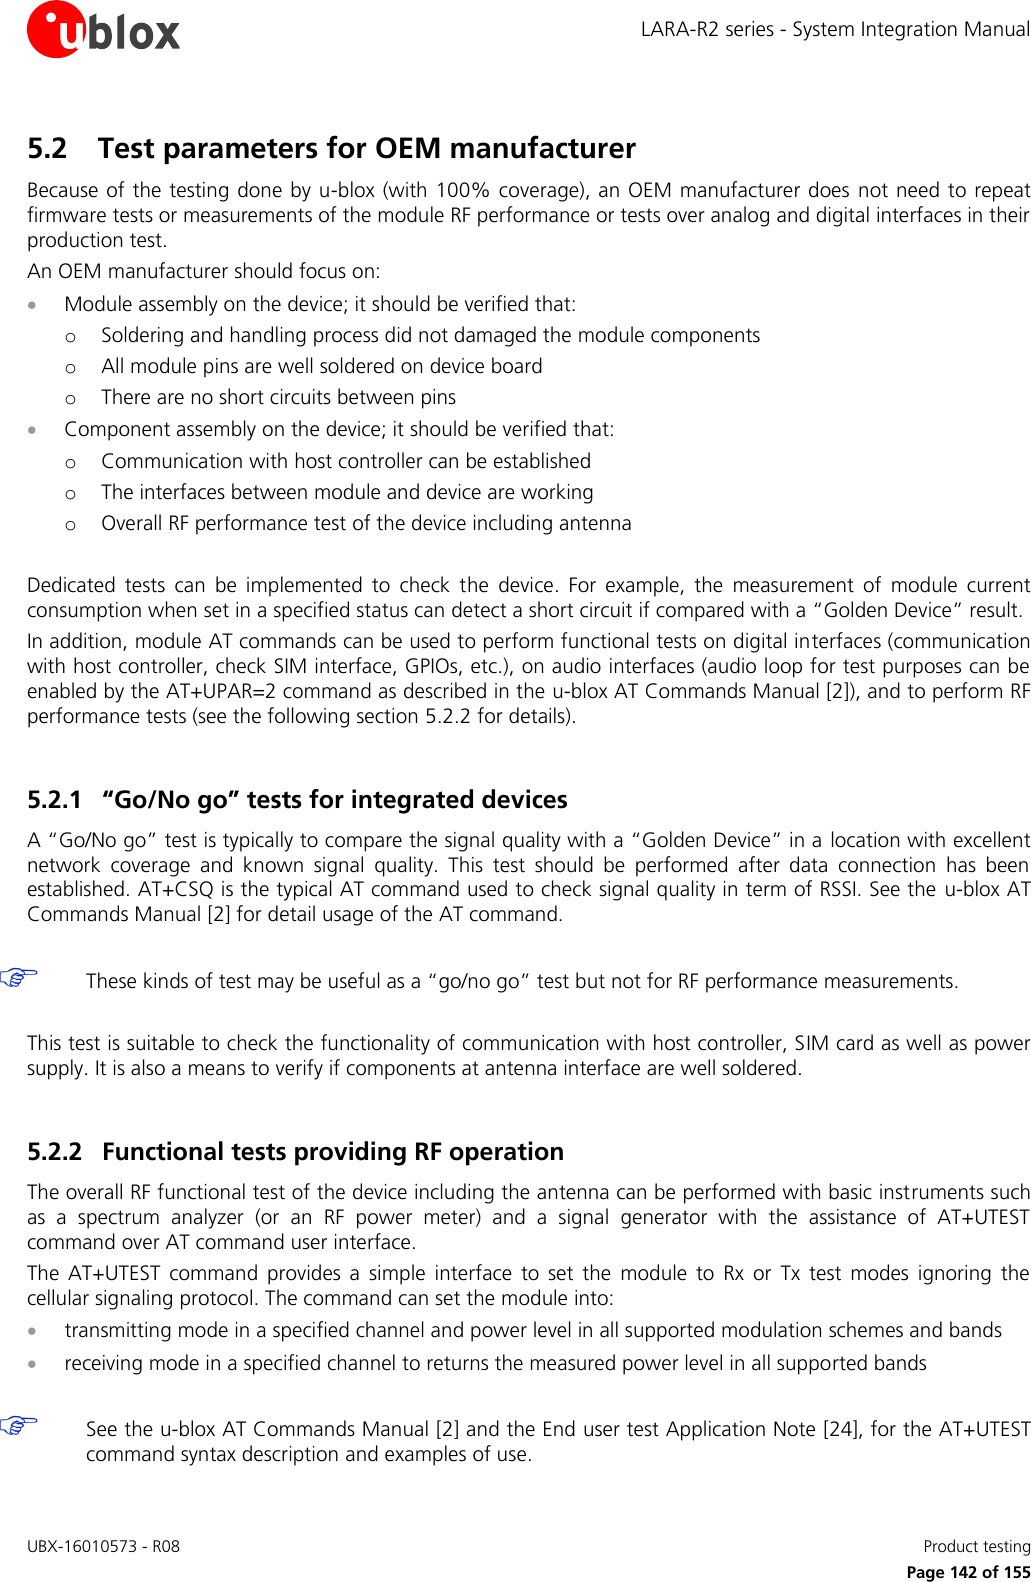 LARA-R2 series - System Integration Manual UBX-16010573 - R08    Product testing     Page 142 of 155 5.2 Test parameters for OEM manufacturer Because of the testing done by u-blox (with 100% coverage), an OEM manufacturer does not need to repeat firmware tests or measurements of the module RF performance or tests over analog and digital interfaces in their production test. An OEM manufacturer should focus on:  Module assembly on the device; it should be verified that: o Soldering and handling process did not damaged the module components o All module pins are well soldered on device board o There are no short circuits between pins  Component assembly on the device; it should be verified that: o Communication with host controller can be established o The interfaces between module and device are working o Overall RF performance test of the device including antenna  Dedicated  tests  can  be  implemented  to  check  the  device.  For  example,  the  measurement  of  module  current consumption when set in a specified status can detect a short circuit if compared with a “Golden Device” result. In addition, module AT commands can be used to perform functional tests on digital interfaces (communication with host controller, check SIM interface, GPIOs, etc.), on audio interfaces (audio loop for test purposes can be enabled by the AT+UPAR=2 command as described in the u-blox AT Commands Manual [2]), and to perform RF performance tests (see the following section 5.2.2 for details).  5.2.1 “Go/No go” tests for integrated devices A “Go/No go” test is typically to compare the signal quality with a “Golden Device” in a location with excellent network  coverage  and  known  signal  quality.  This  test  should  be  performed  after  data  connection  has  been established. AT+CSQ is the typical AT command used to check signal quality in term of RSSI. See the  u-blox AT Commands Manual [2] for detail usage of the AT command.    These kinds of test may be useful as a “go/no go” test but not for RF performance measurements.  This test is suitable to check the functionality of communication with host controller, SIM card as well as power supply. It is also a means to verify if components at antenna interface are well soldered.  5.2.2 Functional tests providing RF operation The overall RF functional test of the device including the antenna can be performed with basic instruments such as  a  spectrum  analyzer  (or  an  RF  power  meter)  and  a  signal  generator  with  the  assistance  of  AT+UTEST command over AT command user interface. The  AT+UTEST  command  provides  a  simple  interface  to  set  the  module  to  Rx  or  Tx  test  modes  ignoring  the cellular signaling protocol. The command can set the module into:  transmitting mode in a specified channel and power level in all supported modulation schemes and bands  receiving mode in a specified channel to returns the measured power level in all supported bands    See the u-blox AT Commands Manual [2] and the End user test Application Note [24], for the AT+UTEST command syntax description and examples of use. 